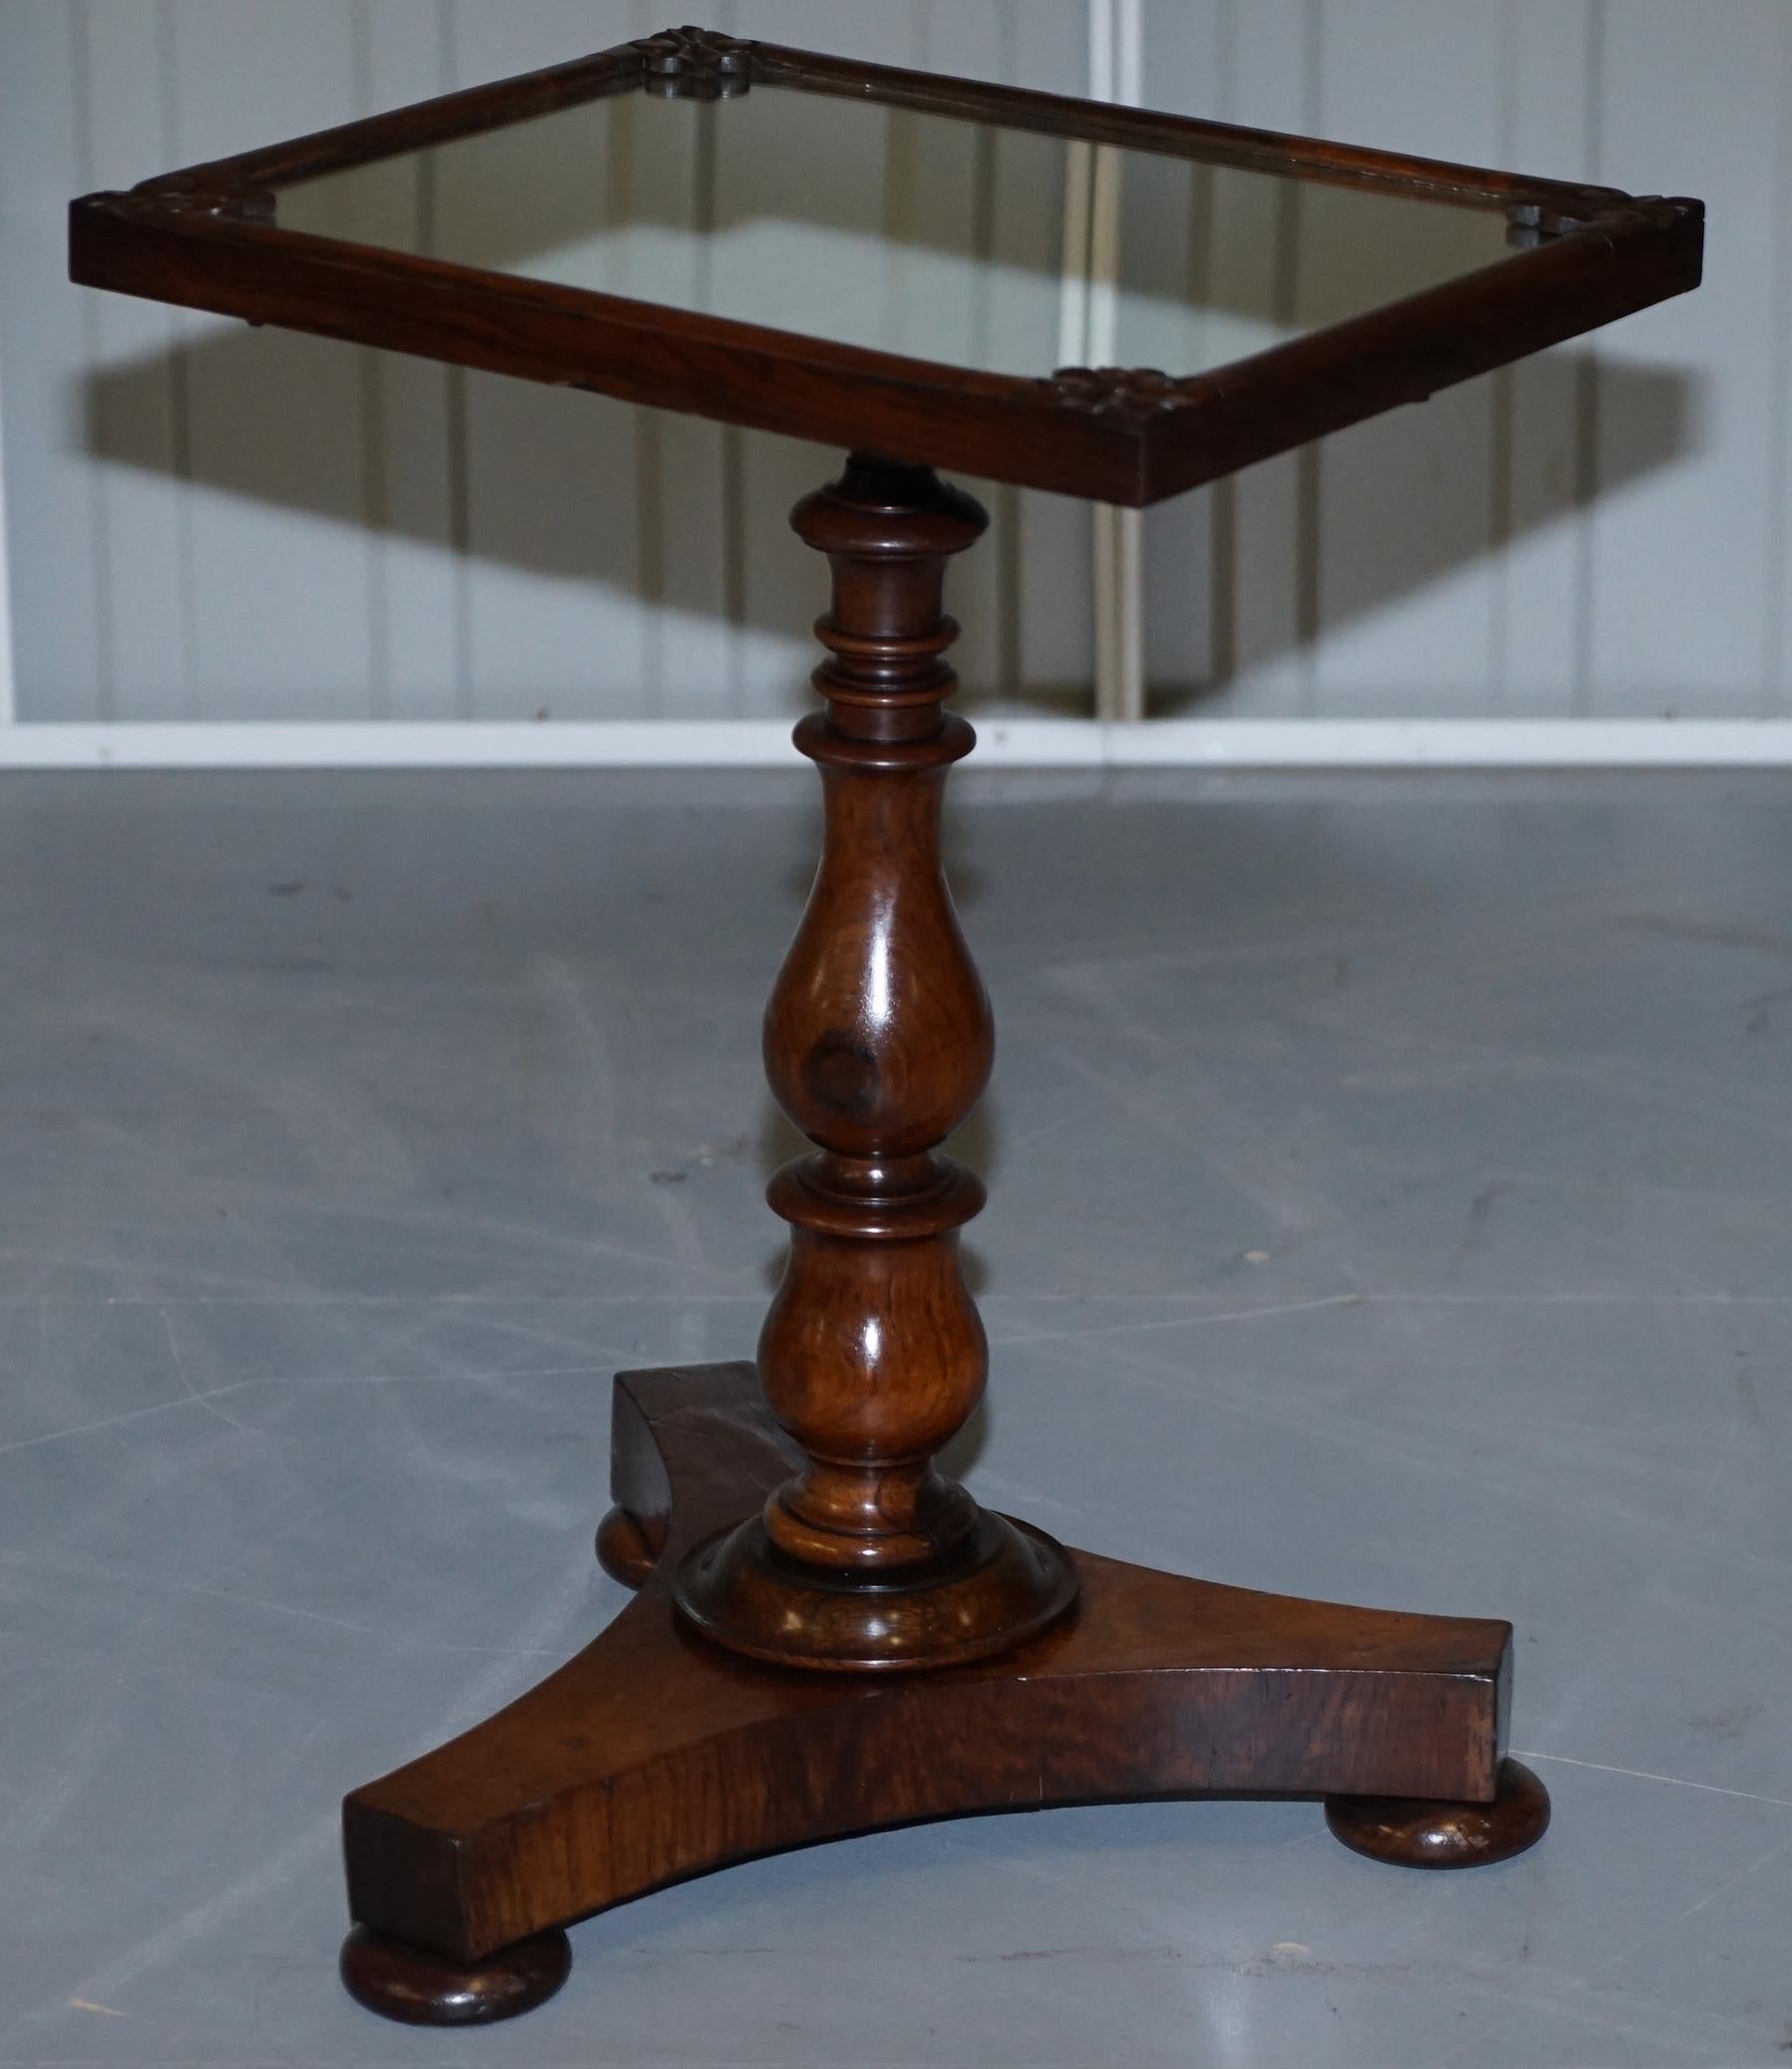 Pair of Stunning Original 1830 William IV Hardwood Mirrored Top Side Lamp Tables For Sale 9